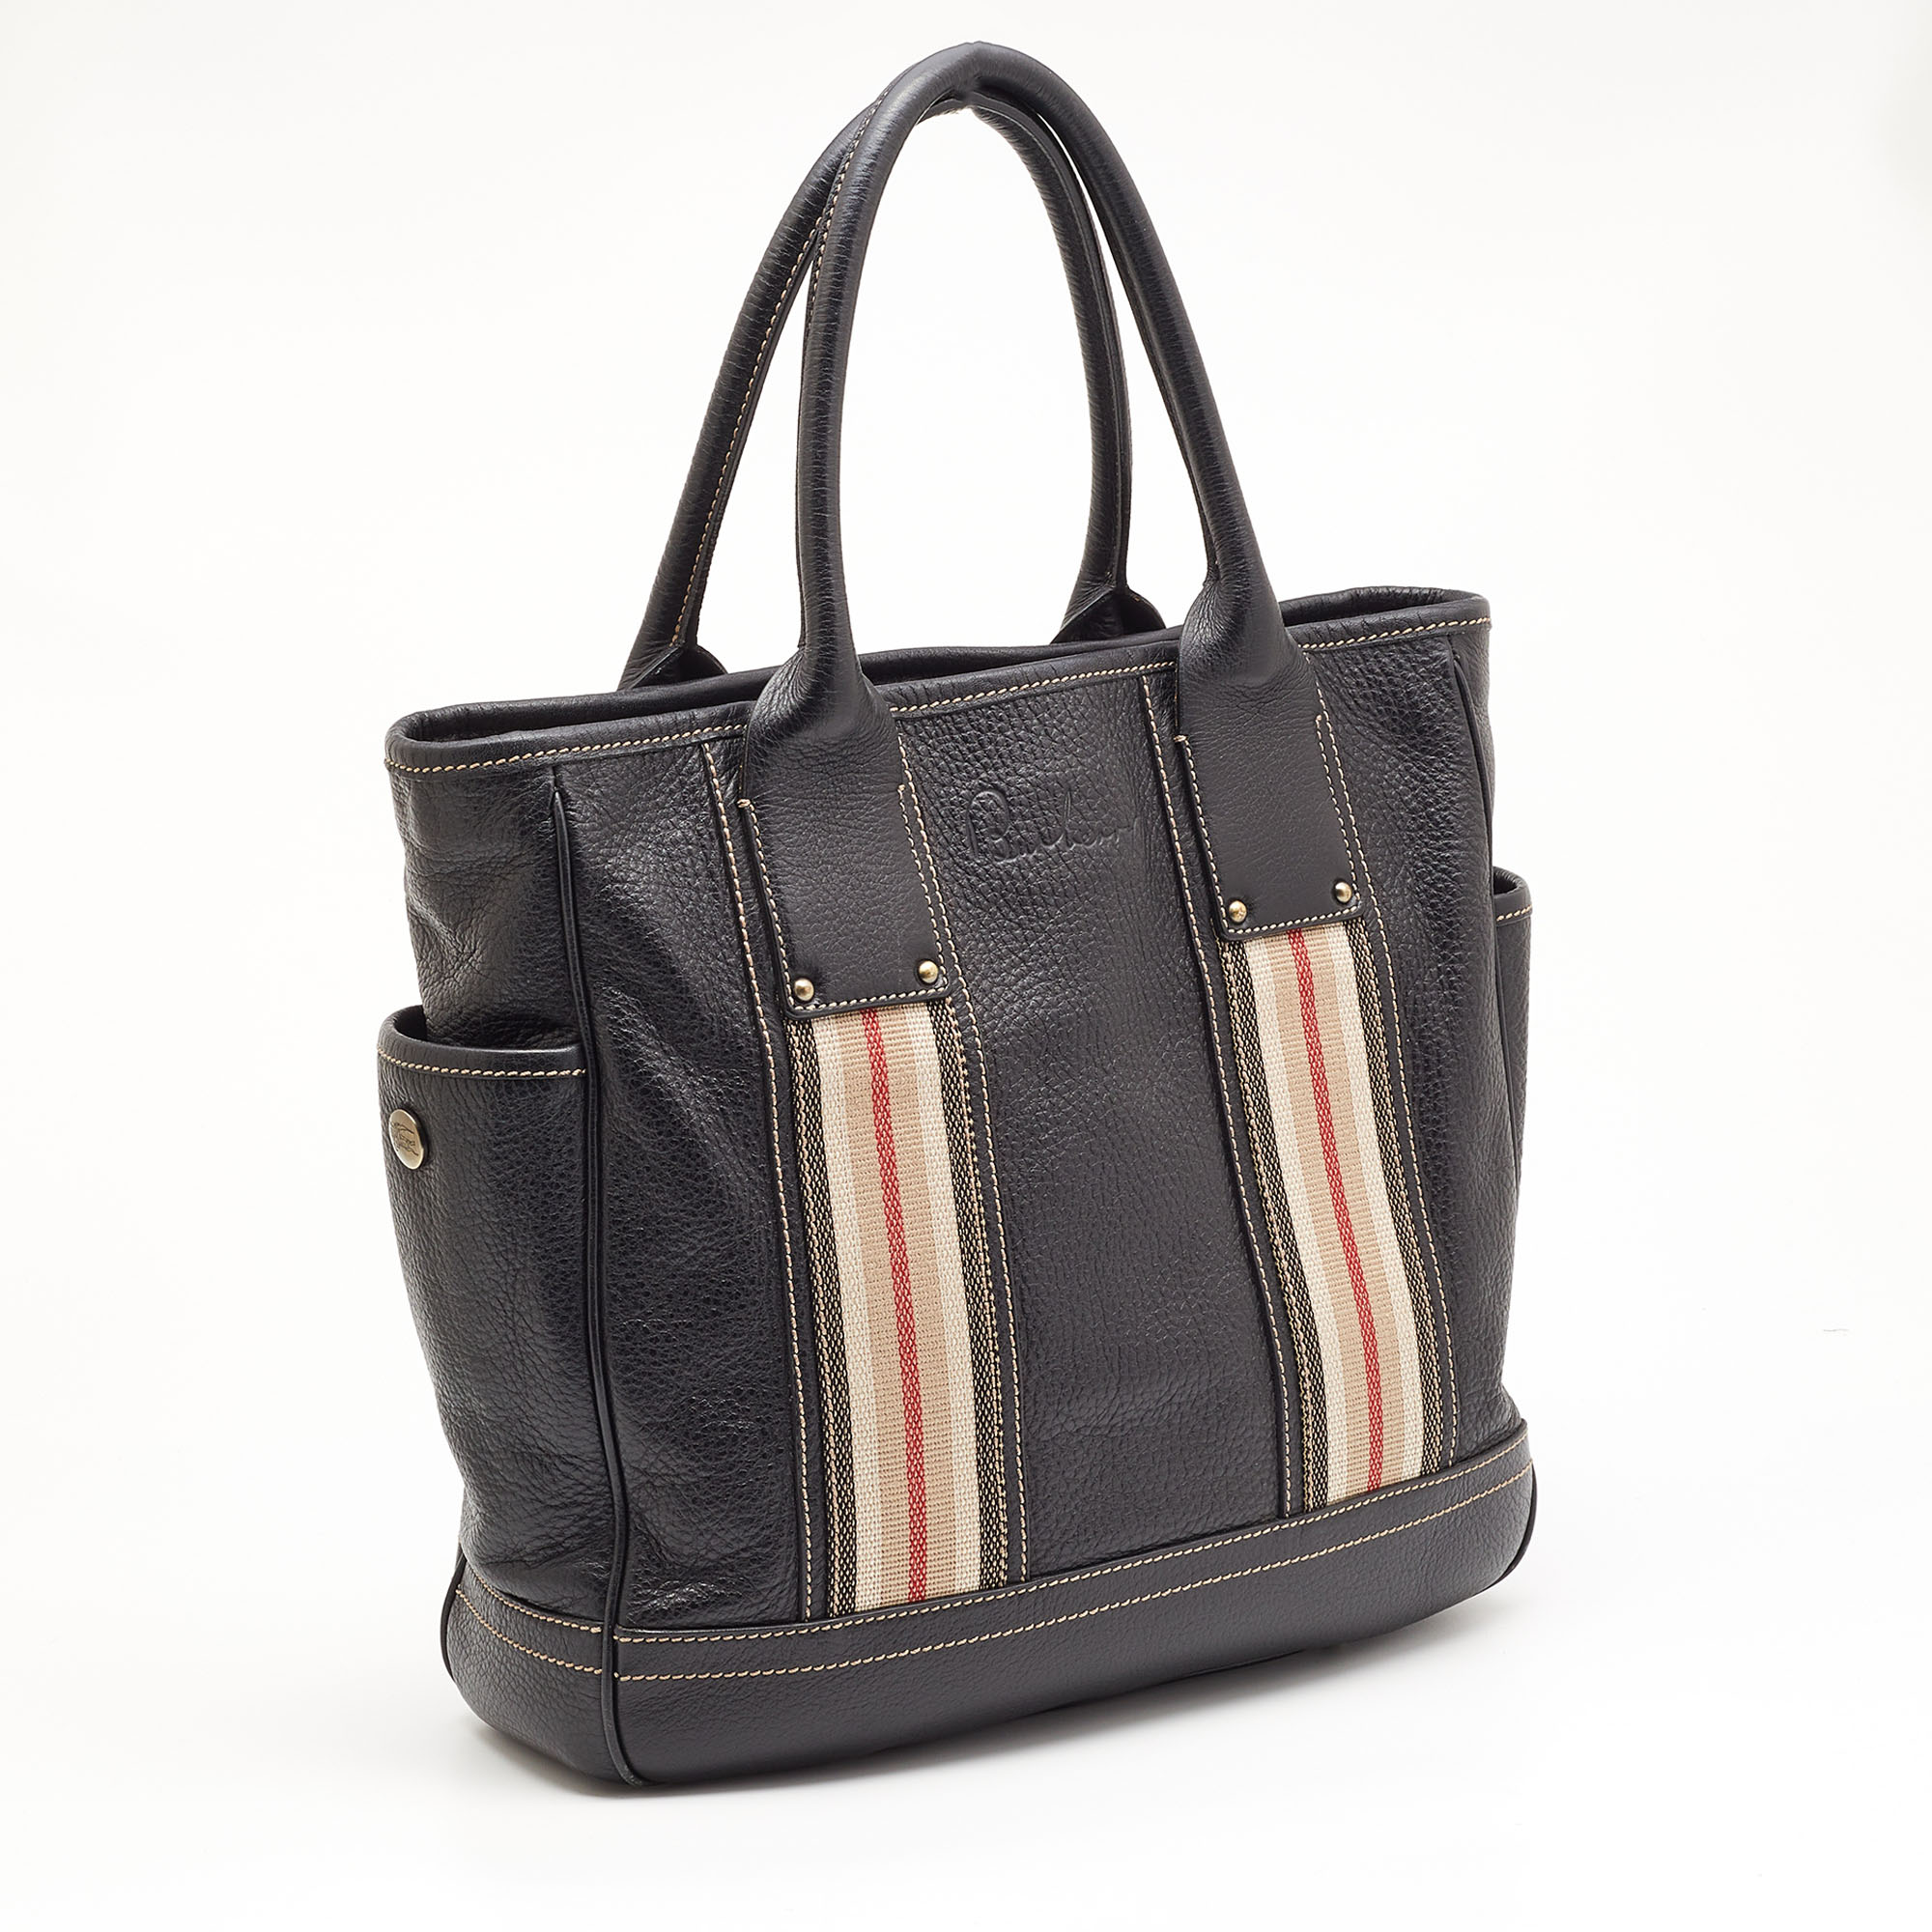 Burberry Black Leather Top Zip Tote